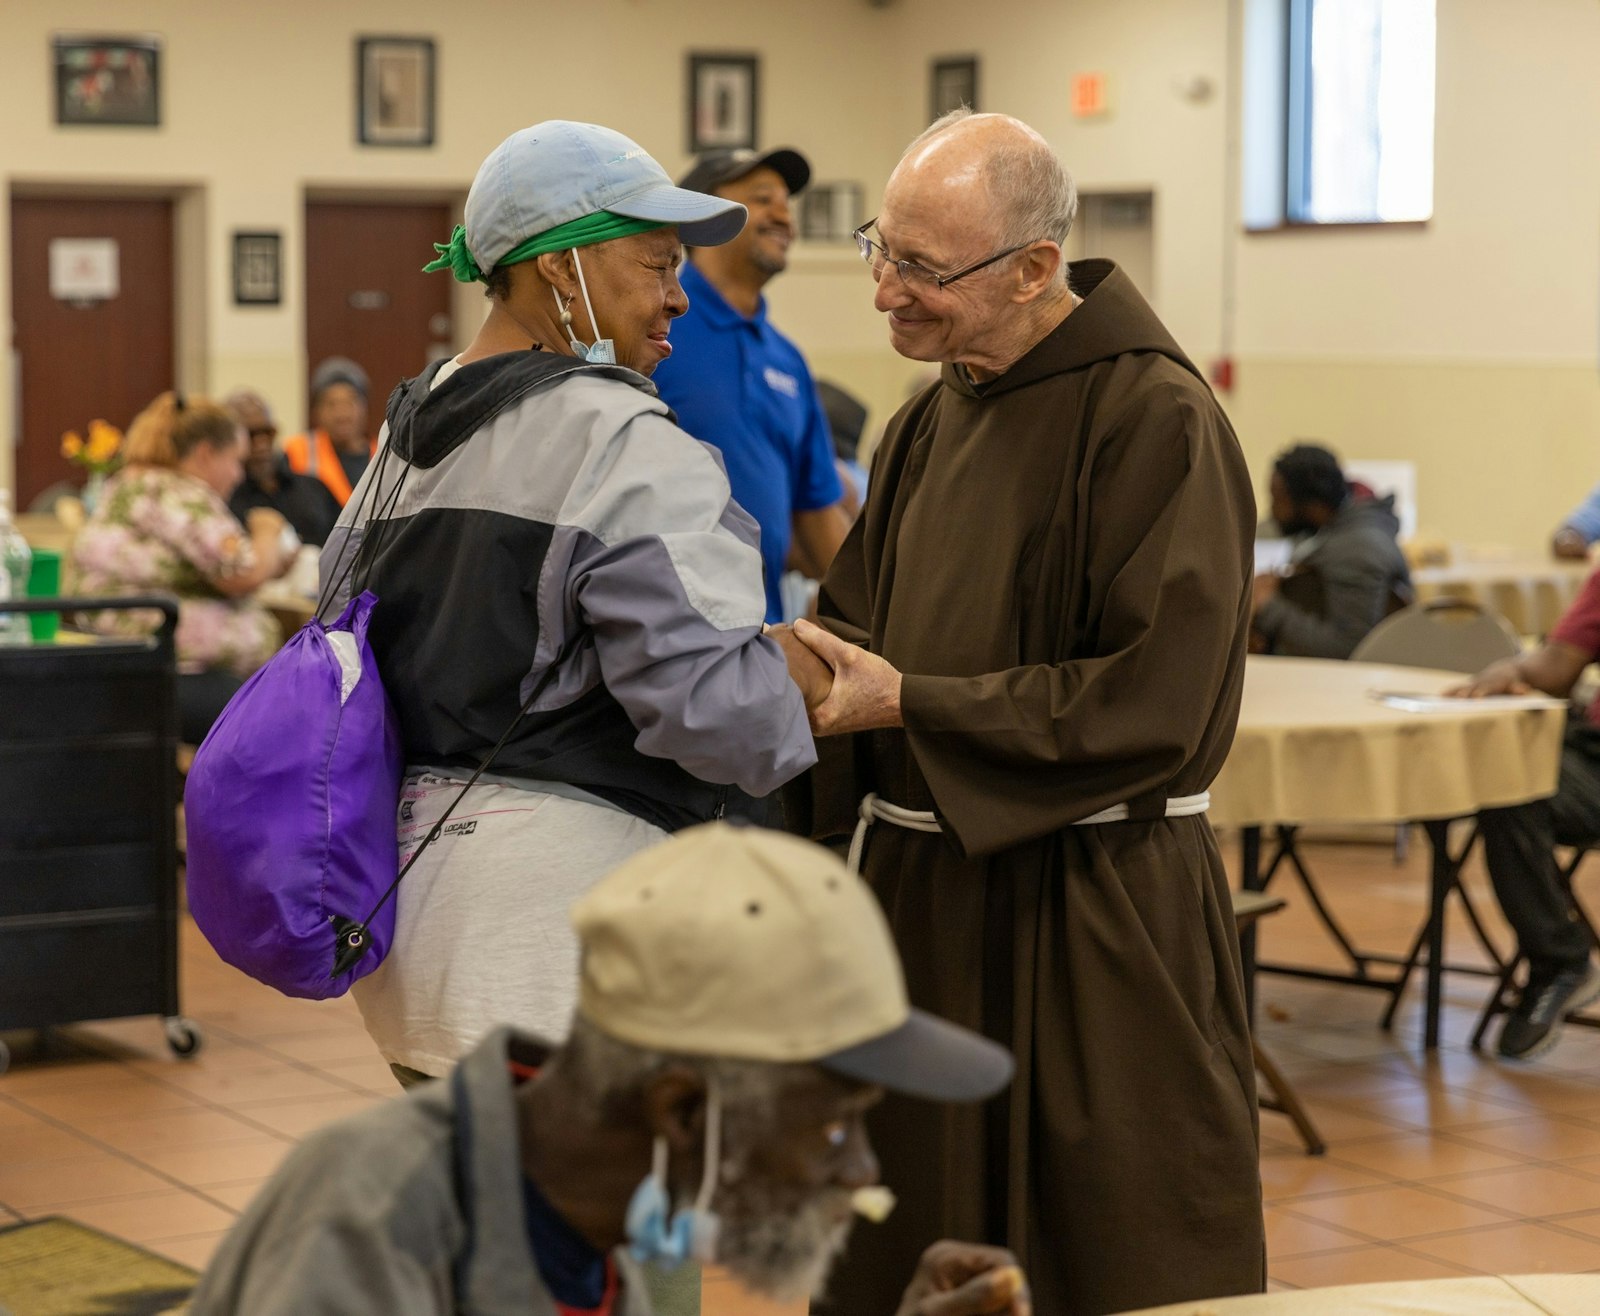 Bro. Malloy insists ministry is a "two-way street," adding volunteers are blessed by the relationships they form with the soup kitchen's guests.